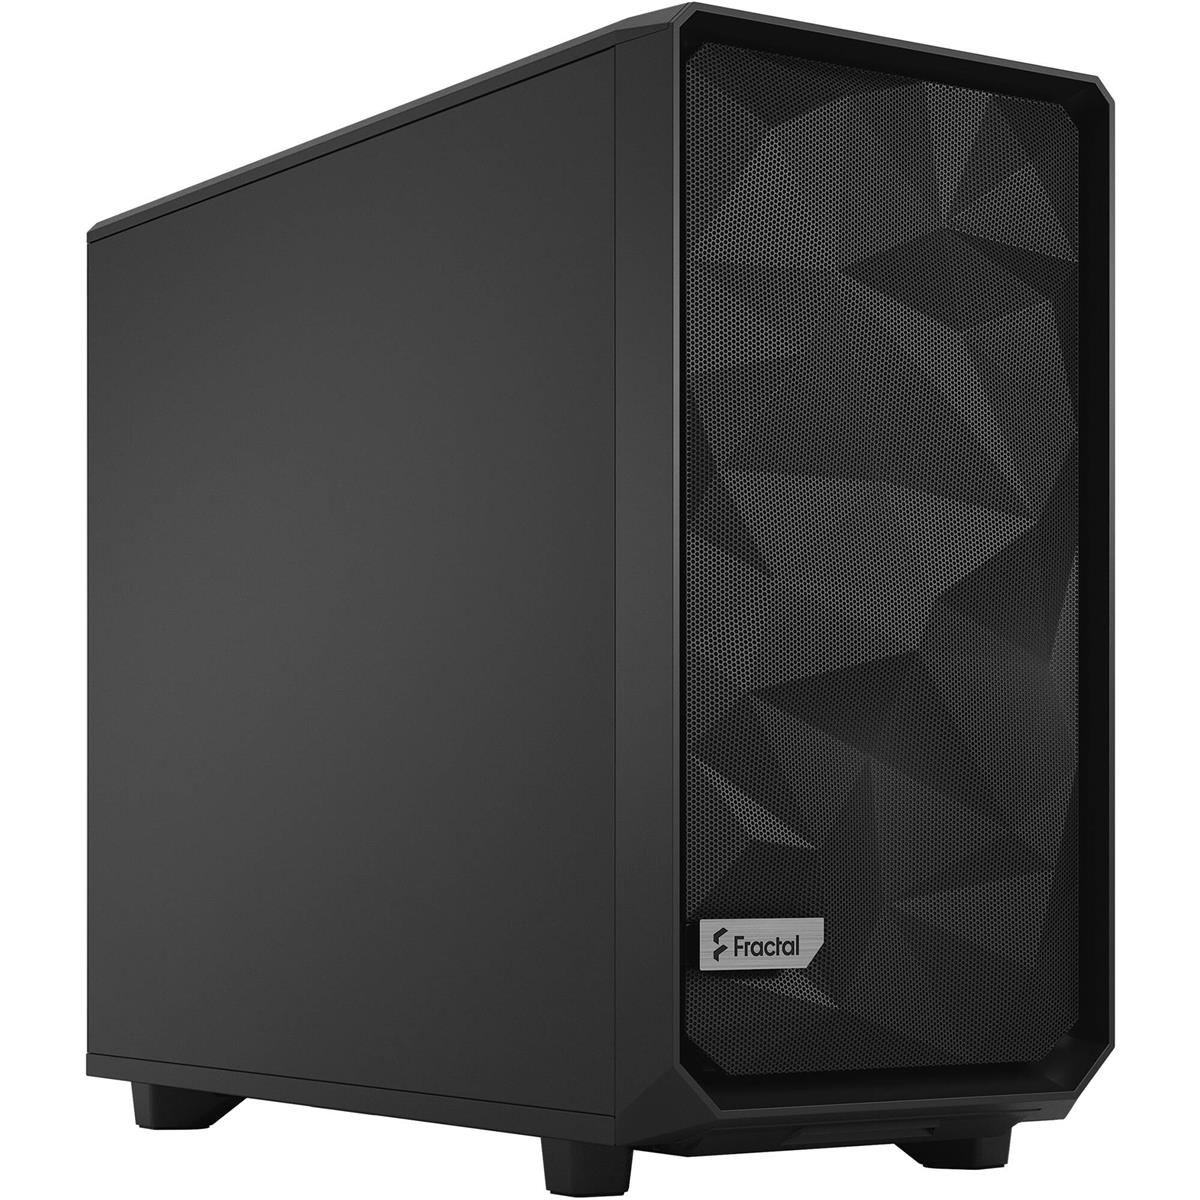 Image of Fractal Design Meshify 2 E-ATX Mid-Tower Case